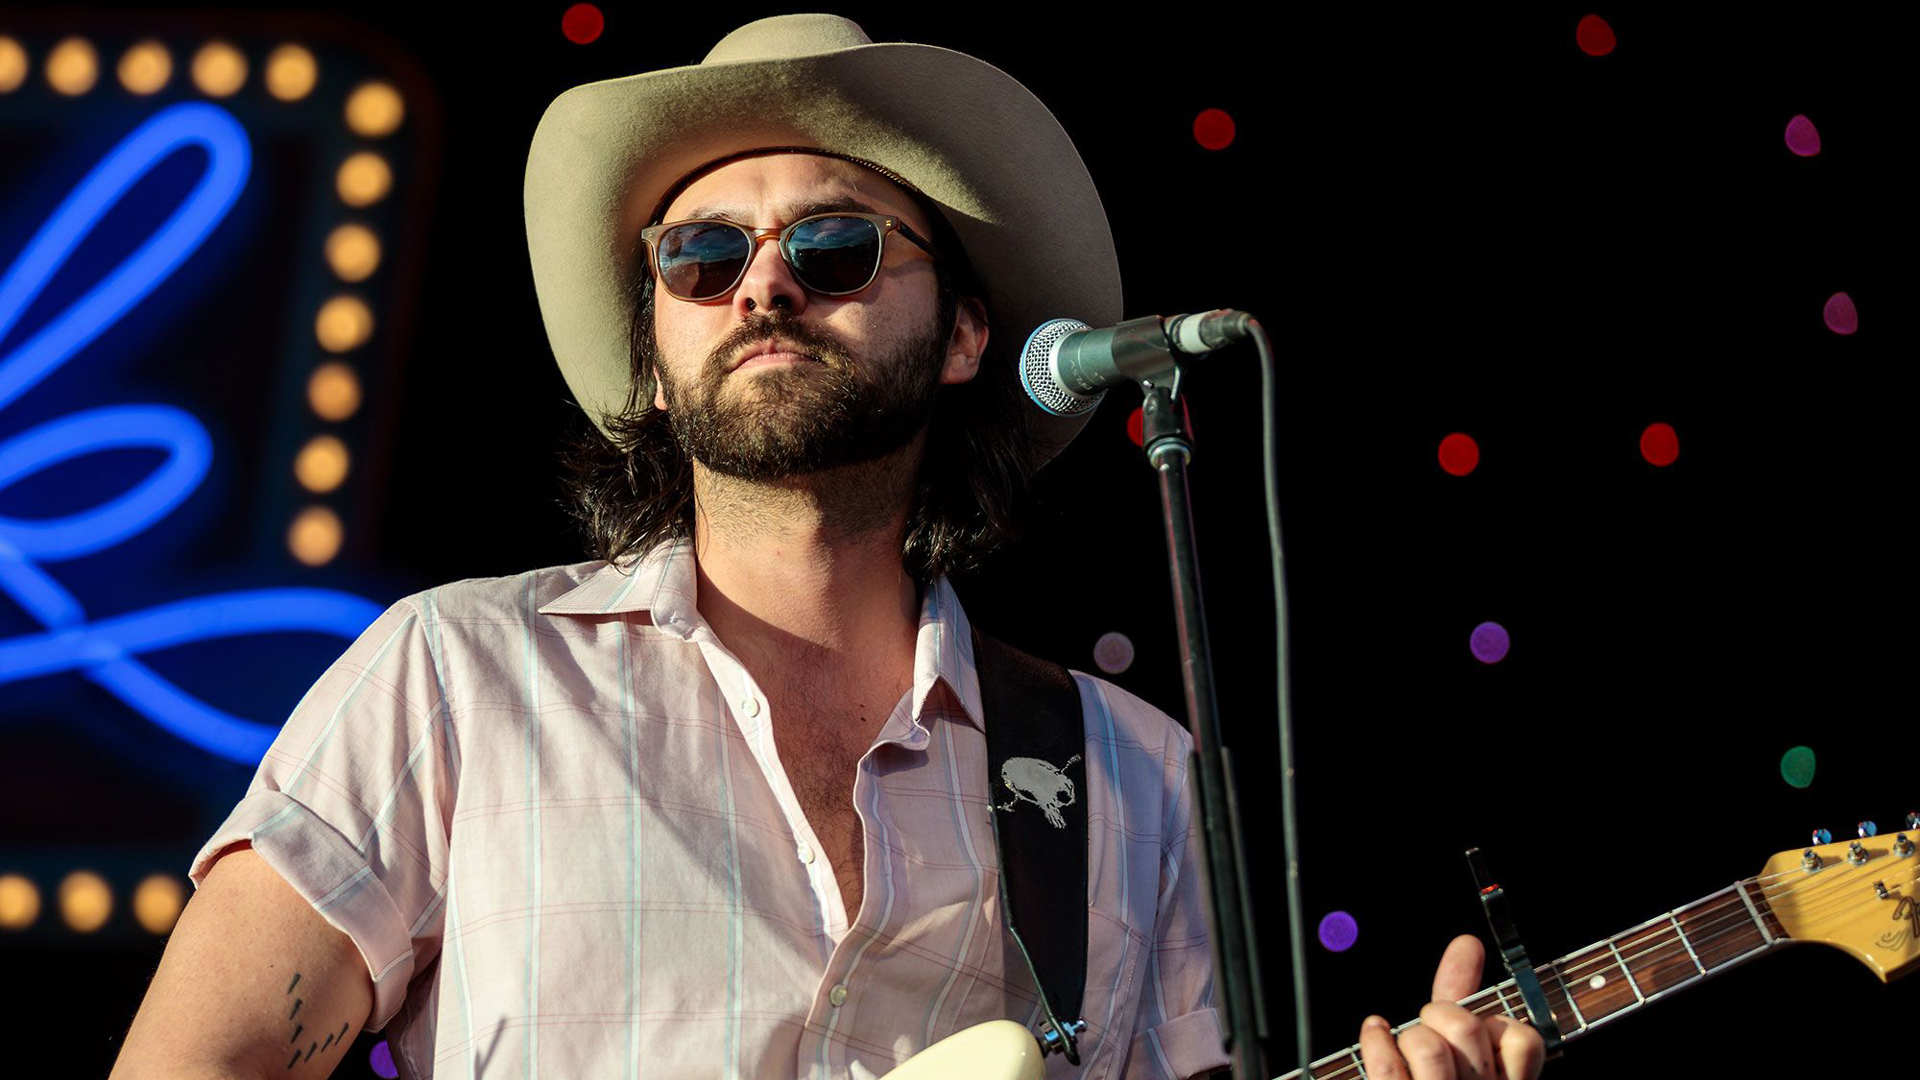 Shakey Graves With Goggles Is Wearing Pink Shirt And Green Cap HD Shakey Graves